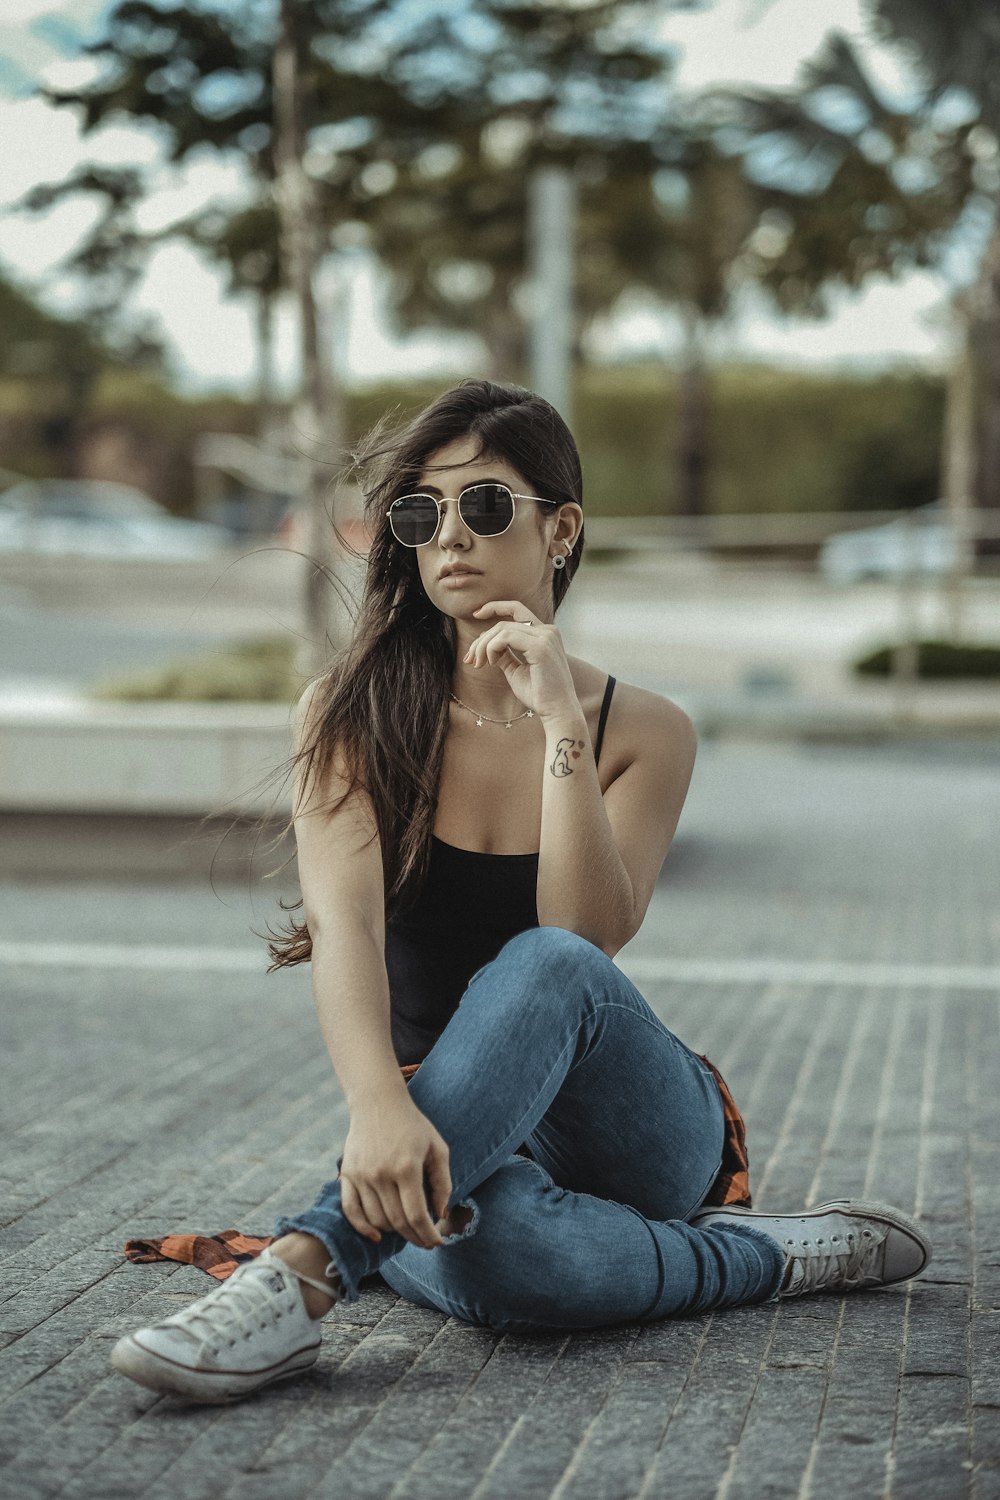 woman wearing shades, black top and blue jeans